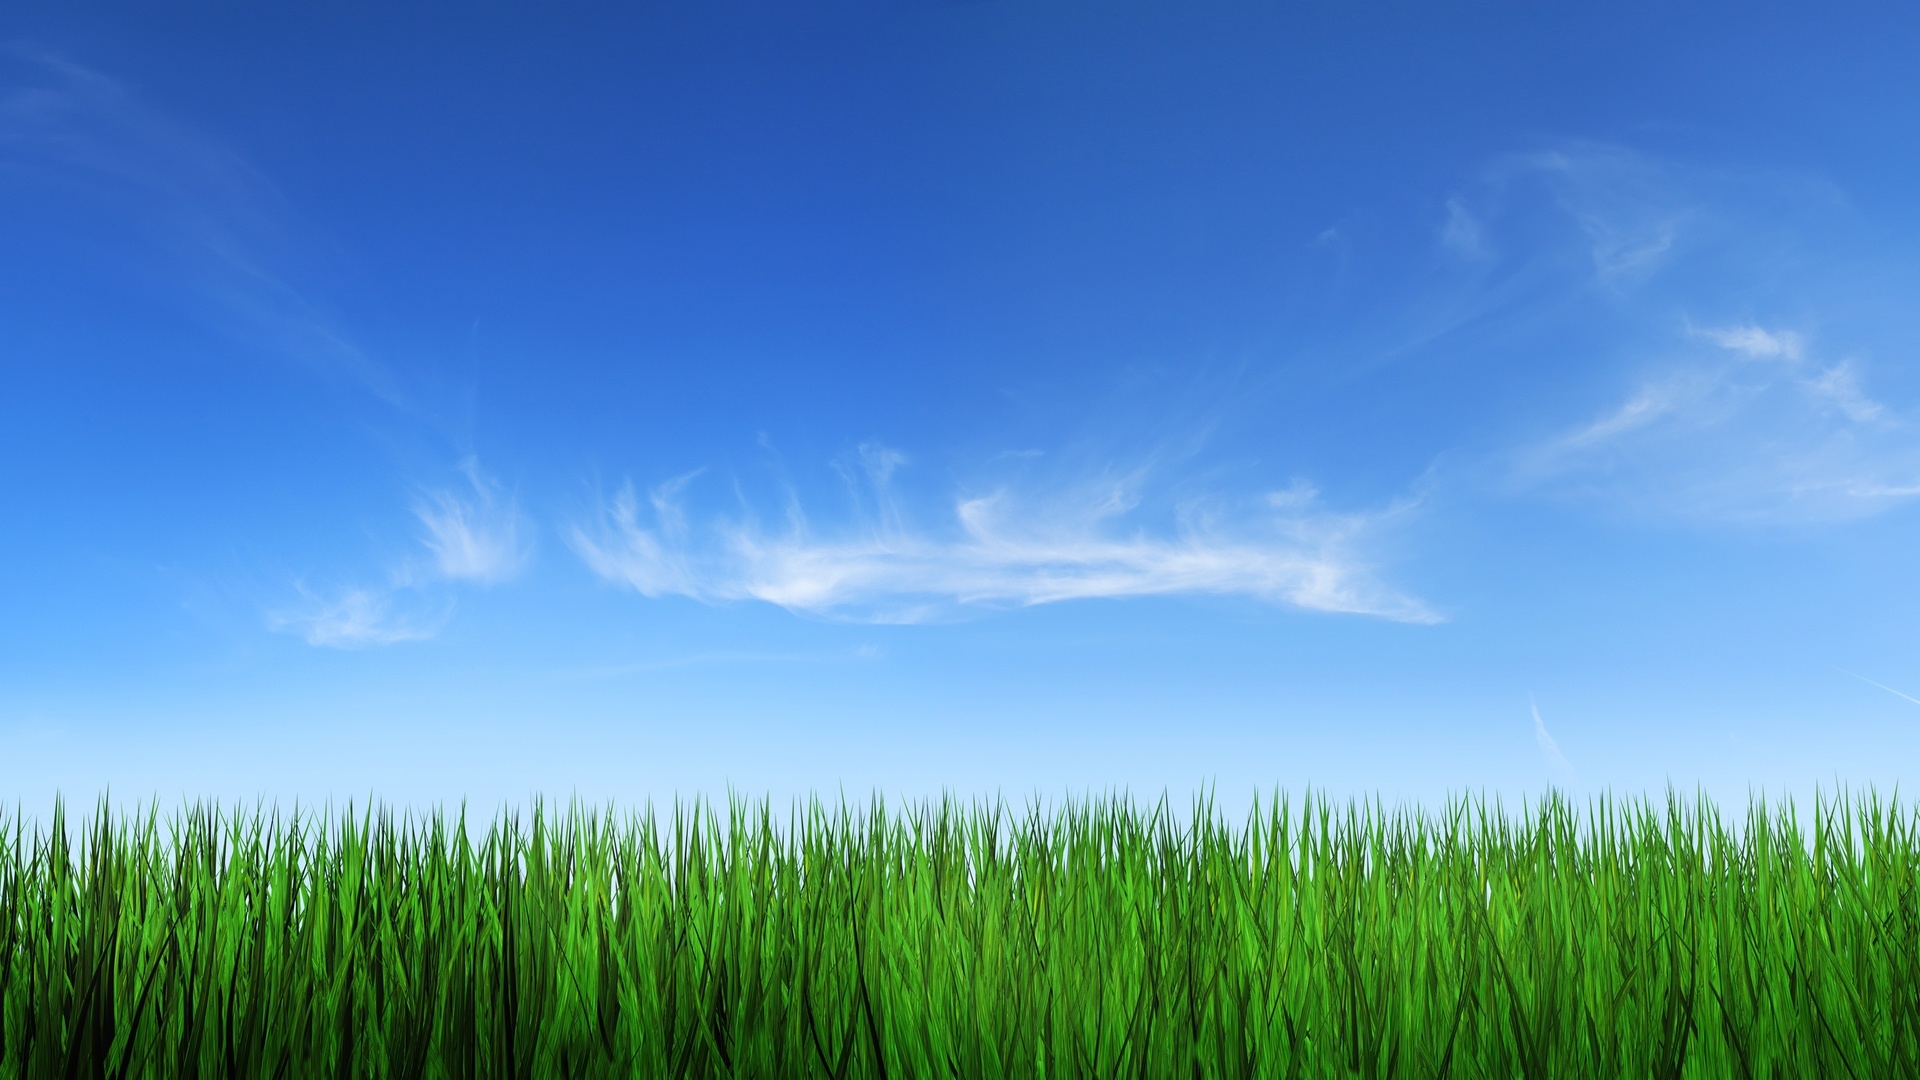 Sky And Grass Pic